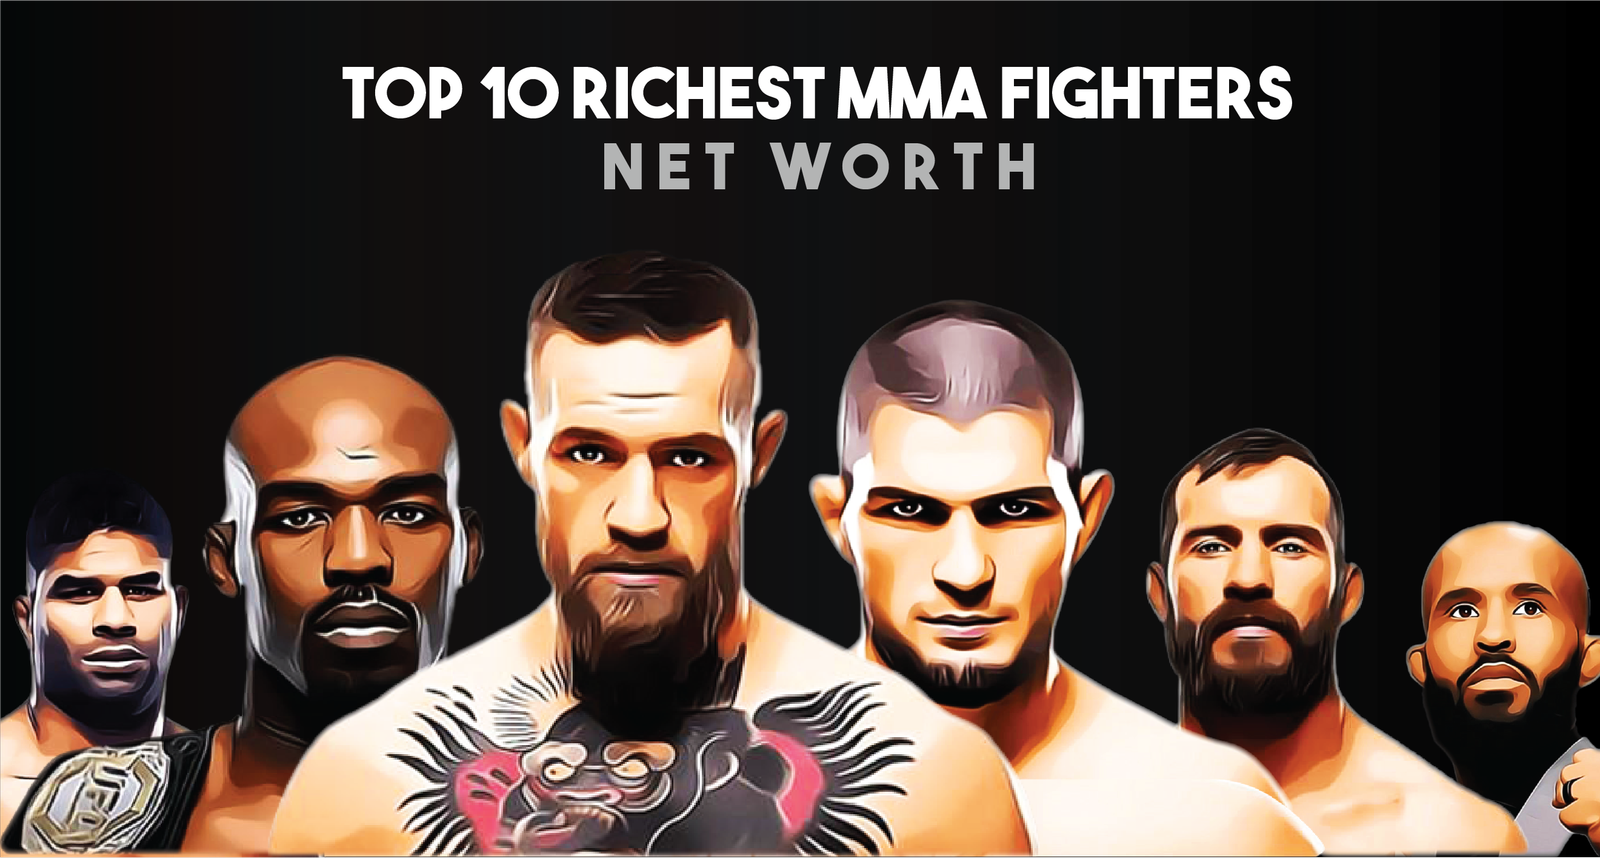 Top 10 Richest MMA Fighters & Their Net Worth